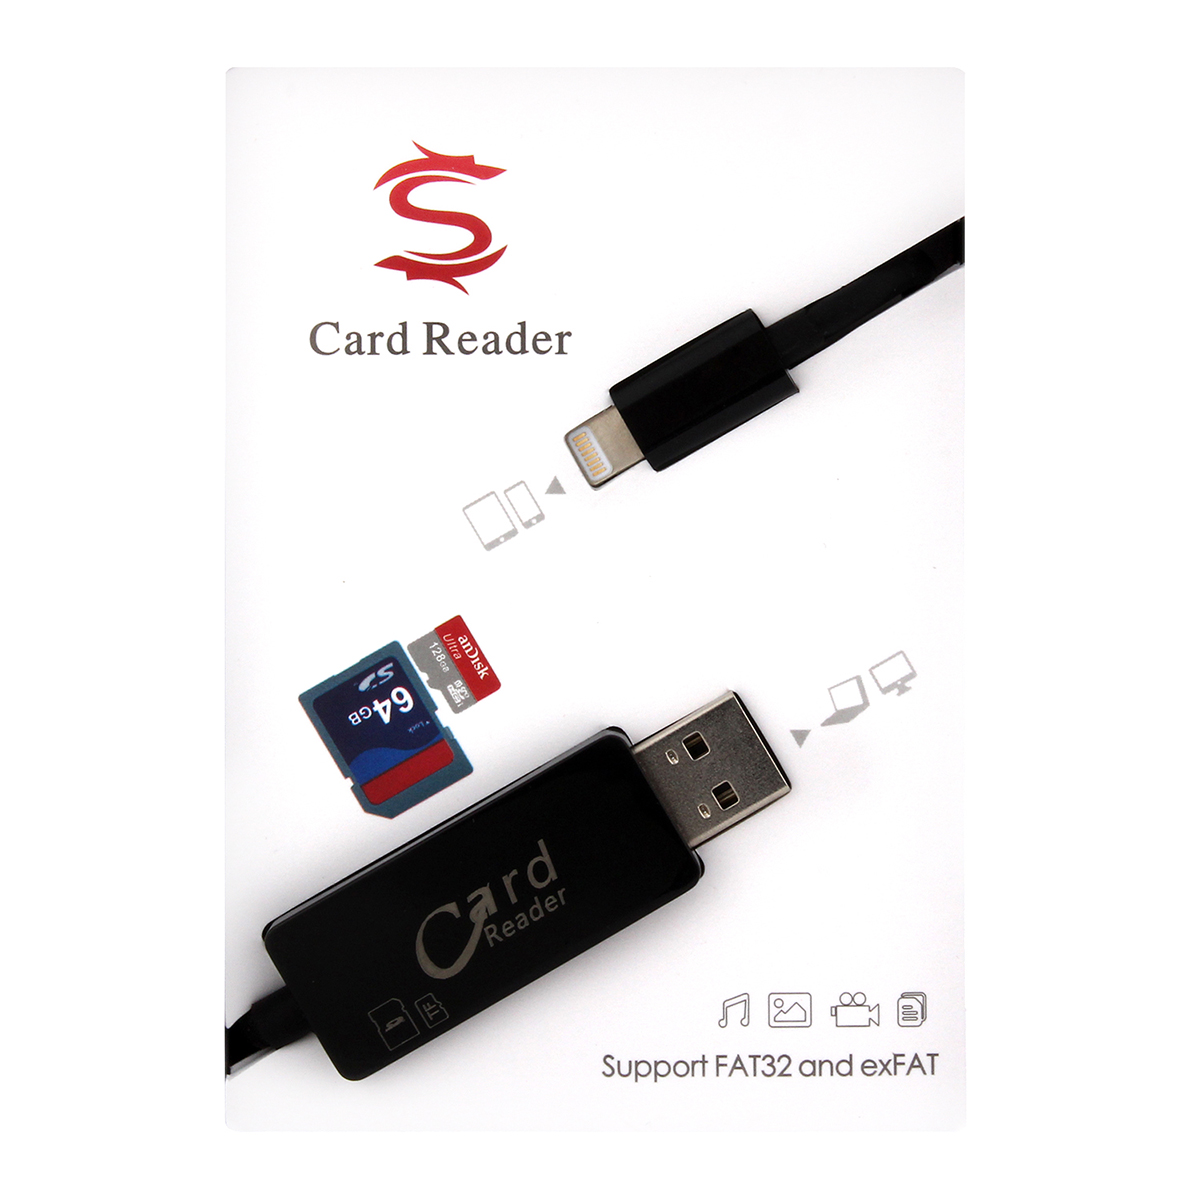 2 in 1 TF Micro SD Card Reader Charging Cable for iPhone 5 6 6S Plus - Black